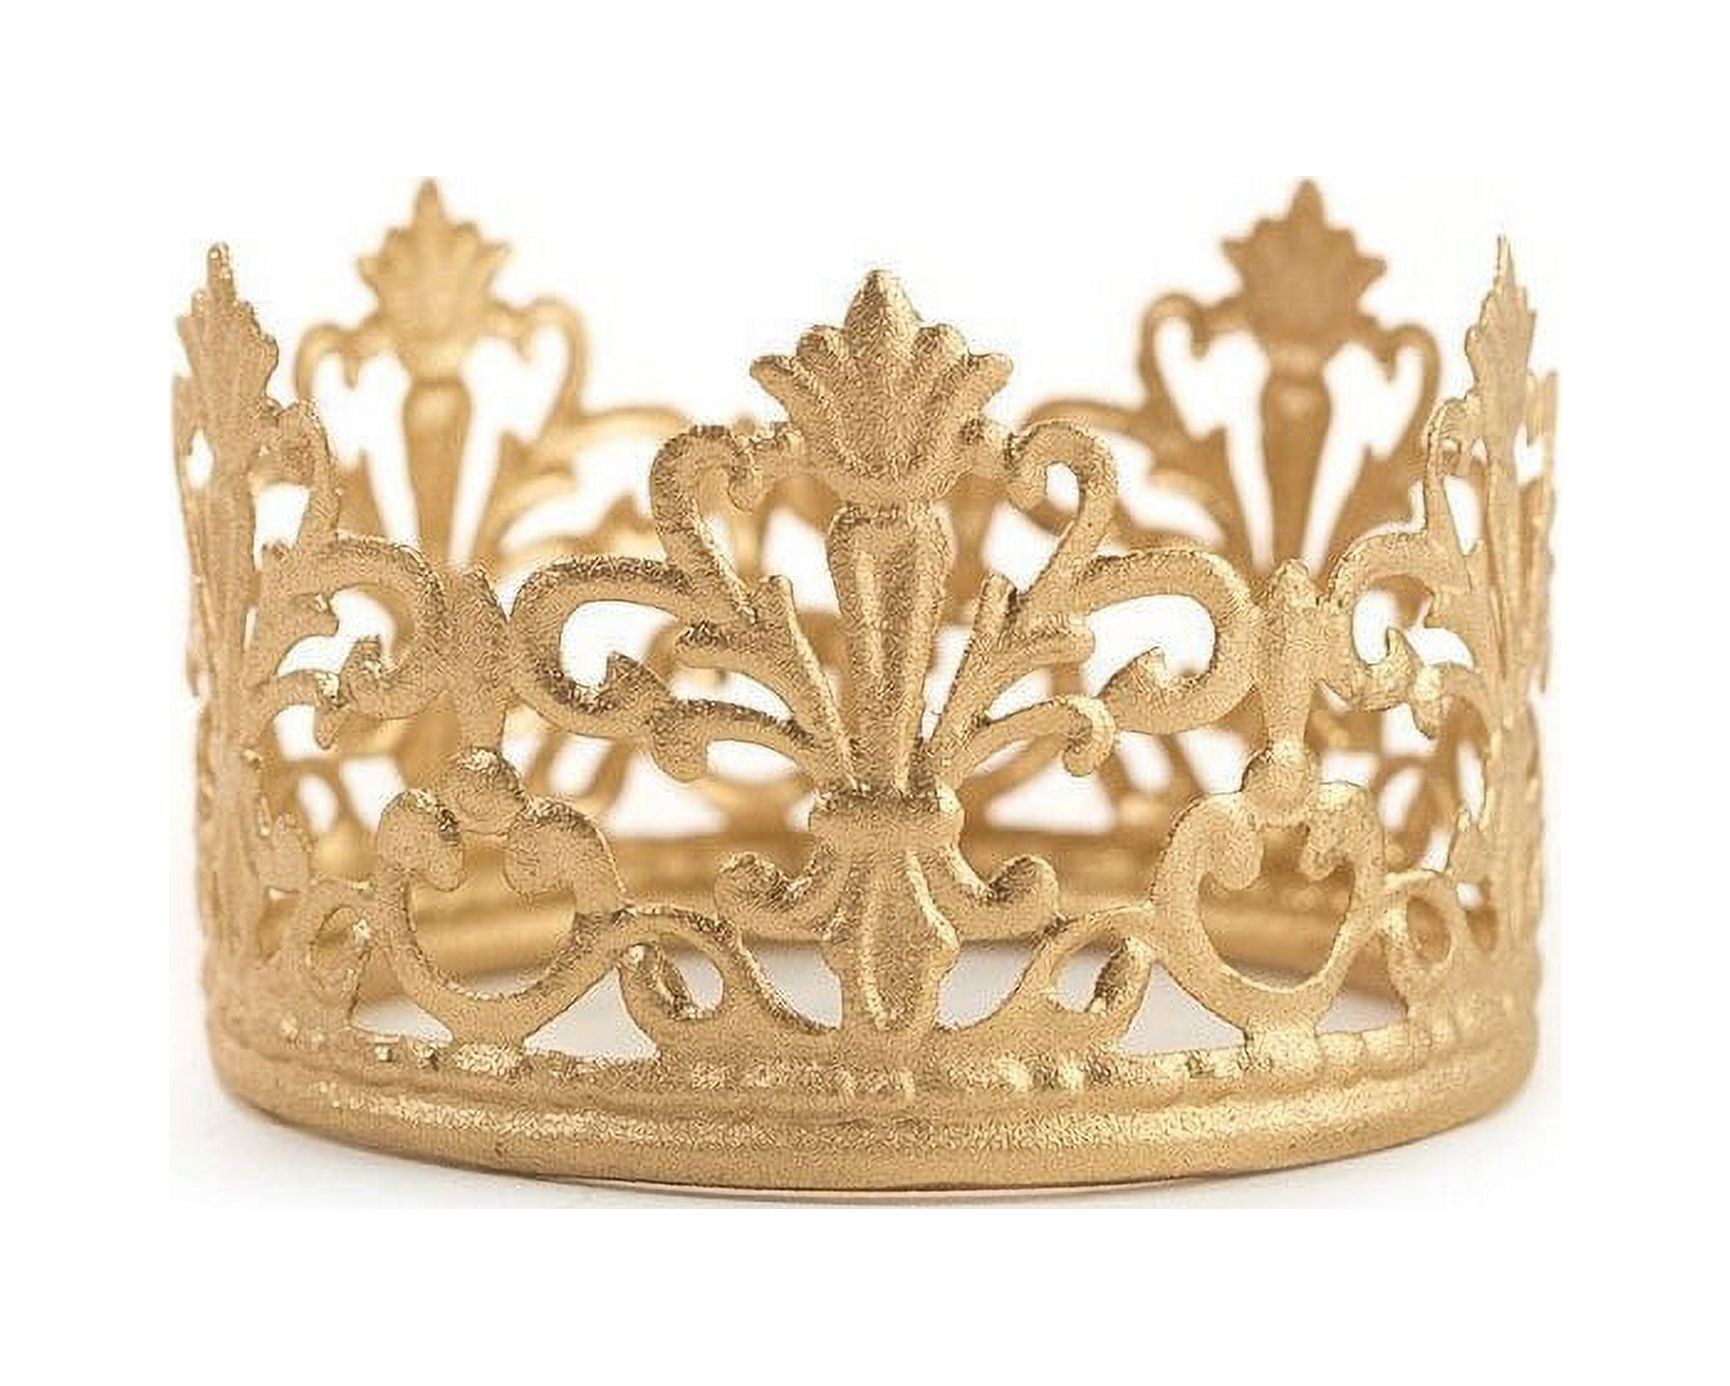 Gold Vintage Mini Princess Crown Cake Topper Crown Cake Topper Small Wedding - image 4 of 4